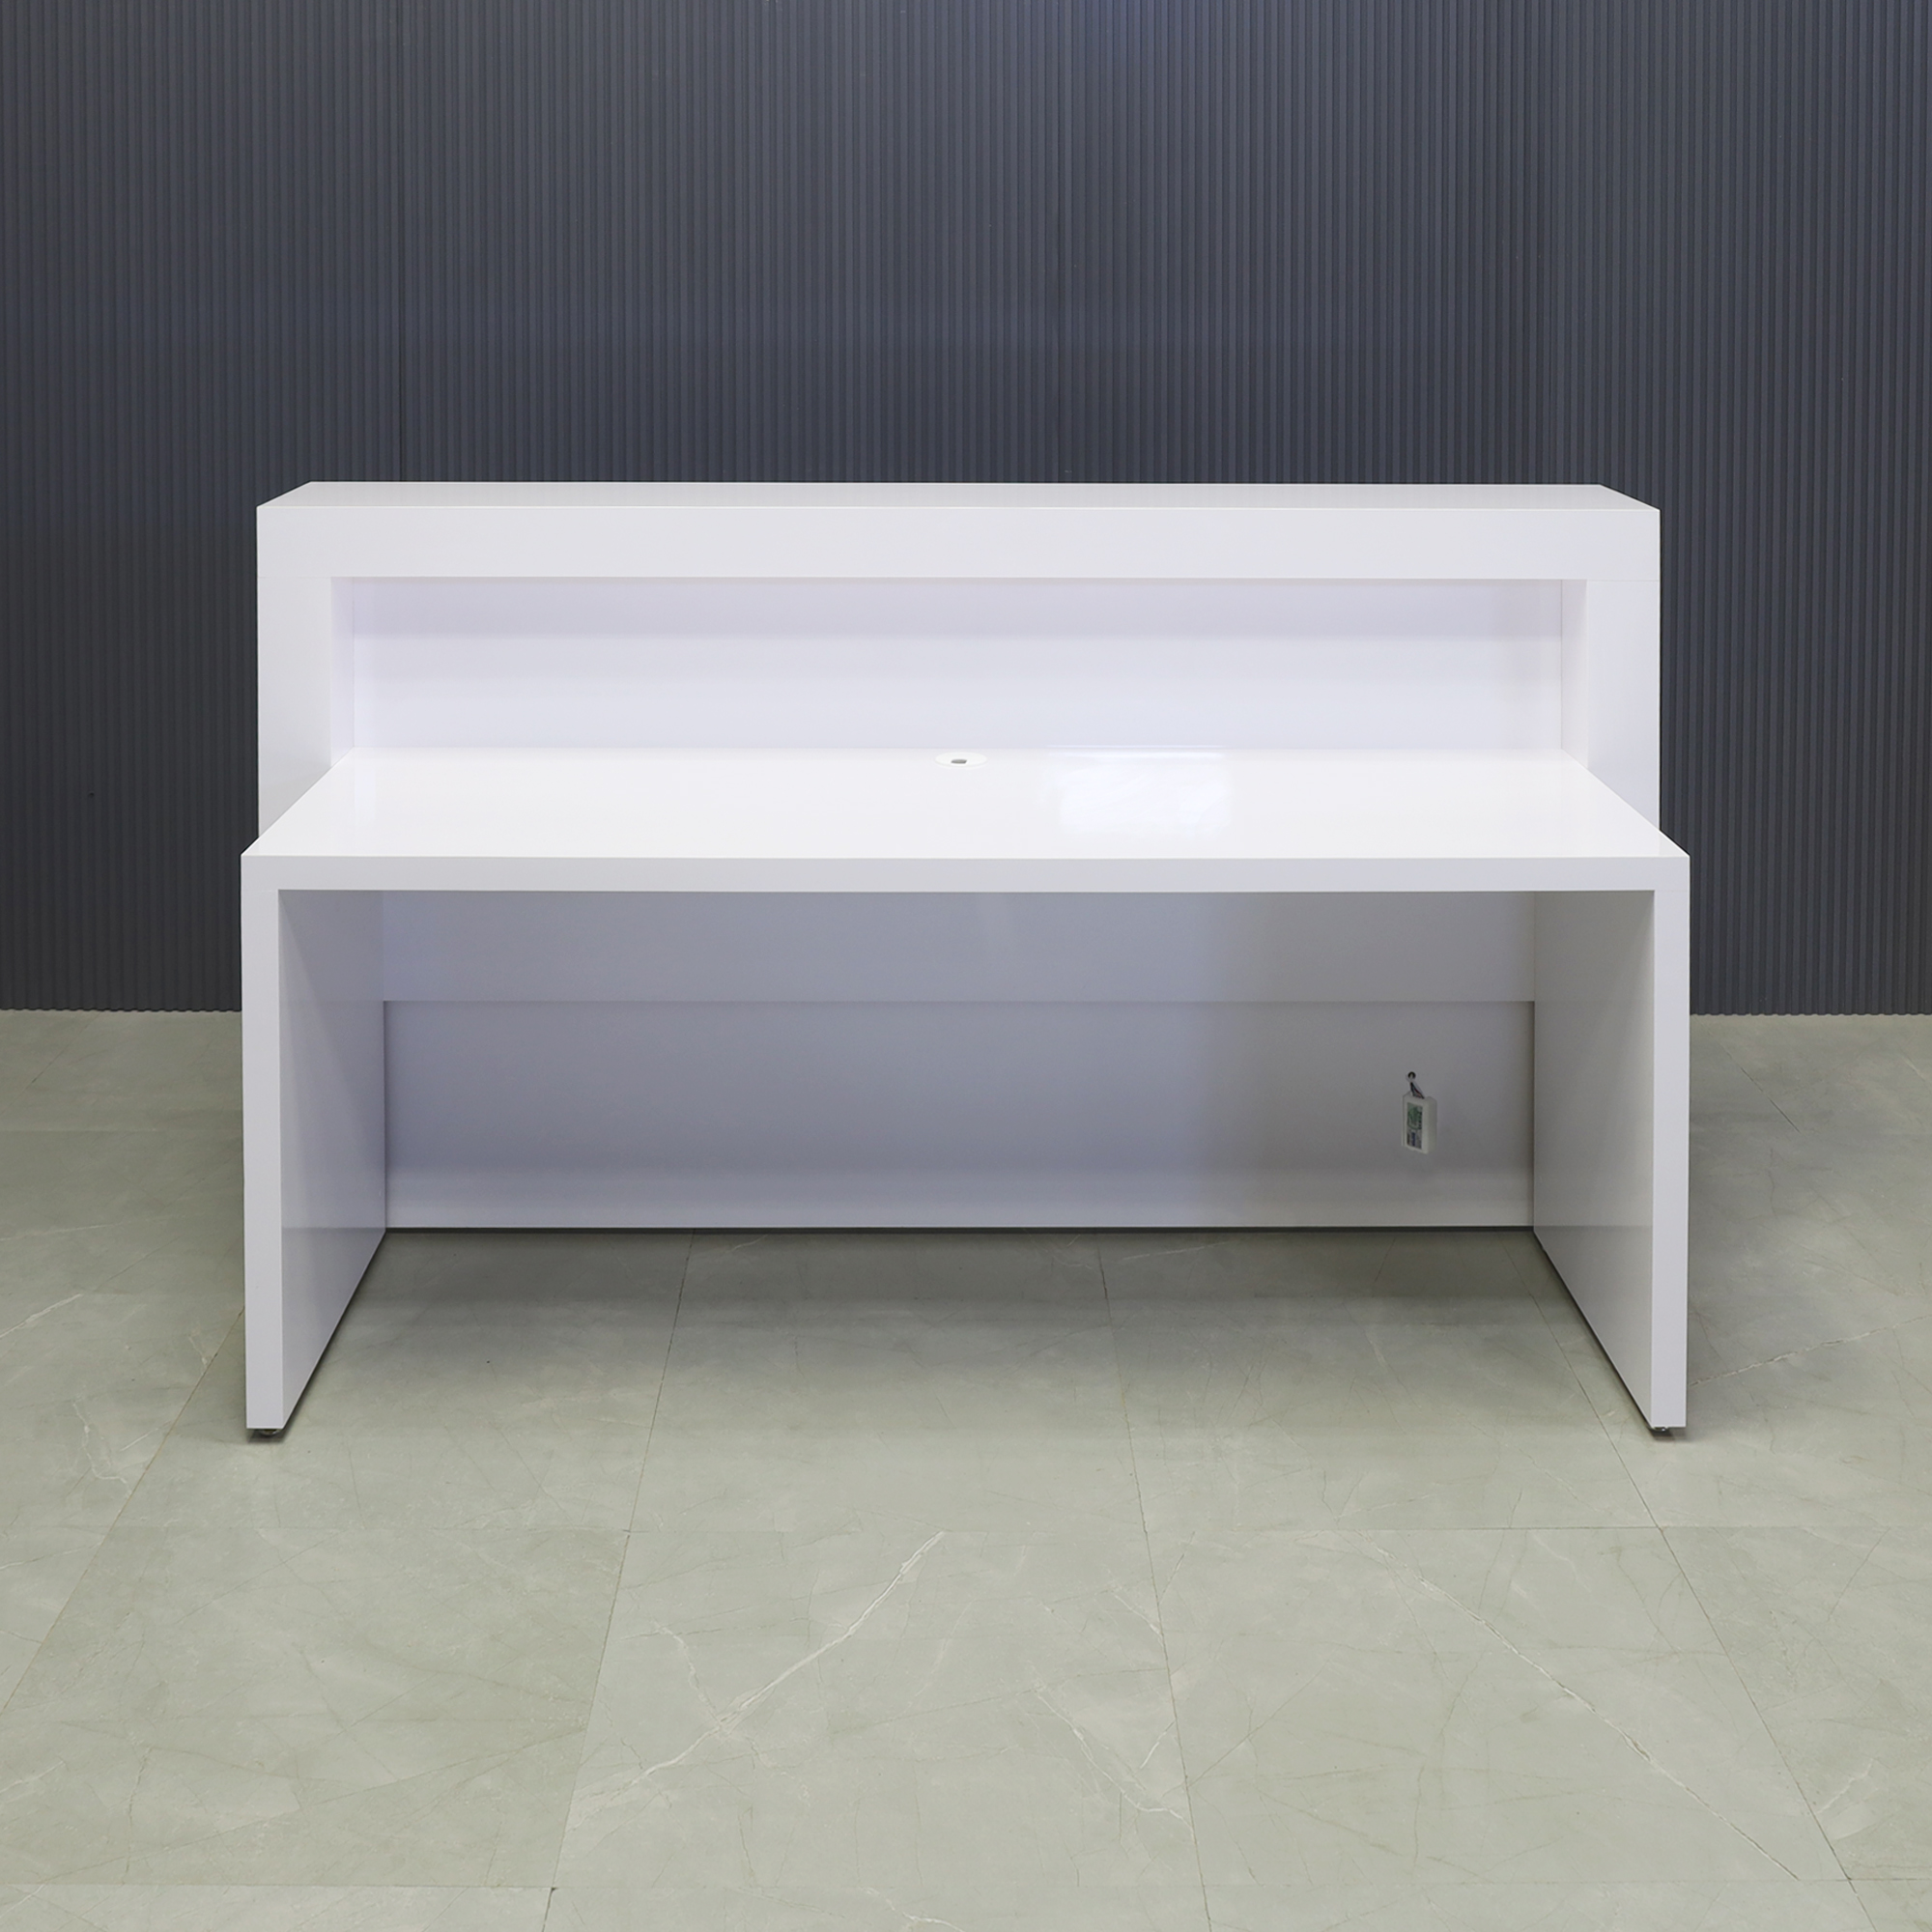 72-inch New York Straight Reception Desk in white gloss laminate finish, with multi-colored LED, shown here.